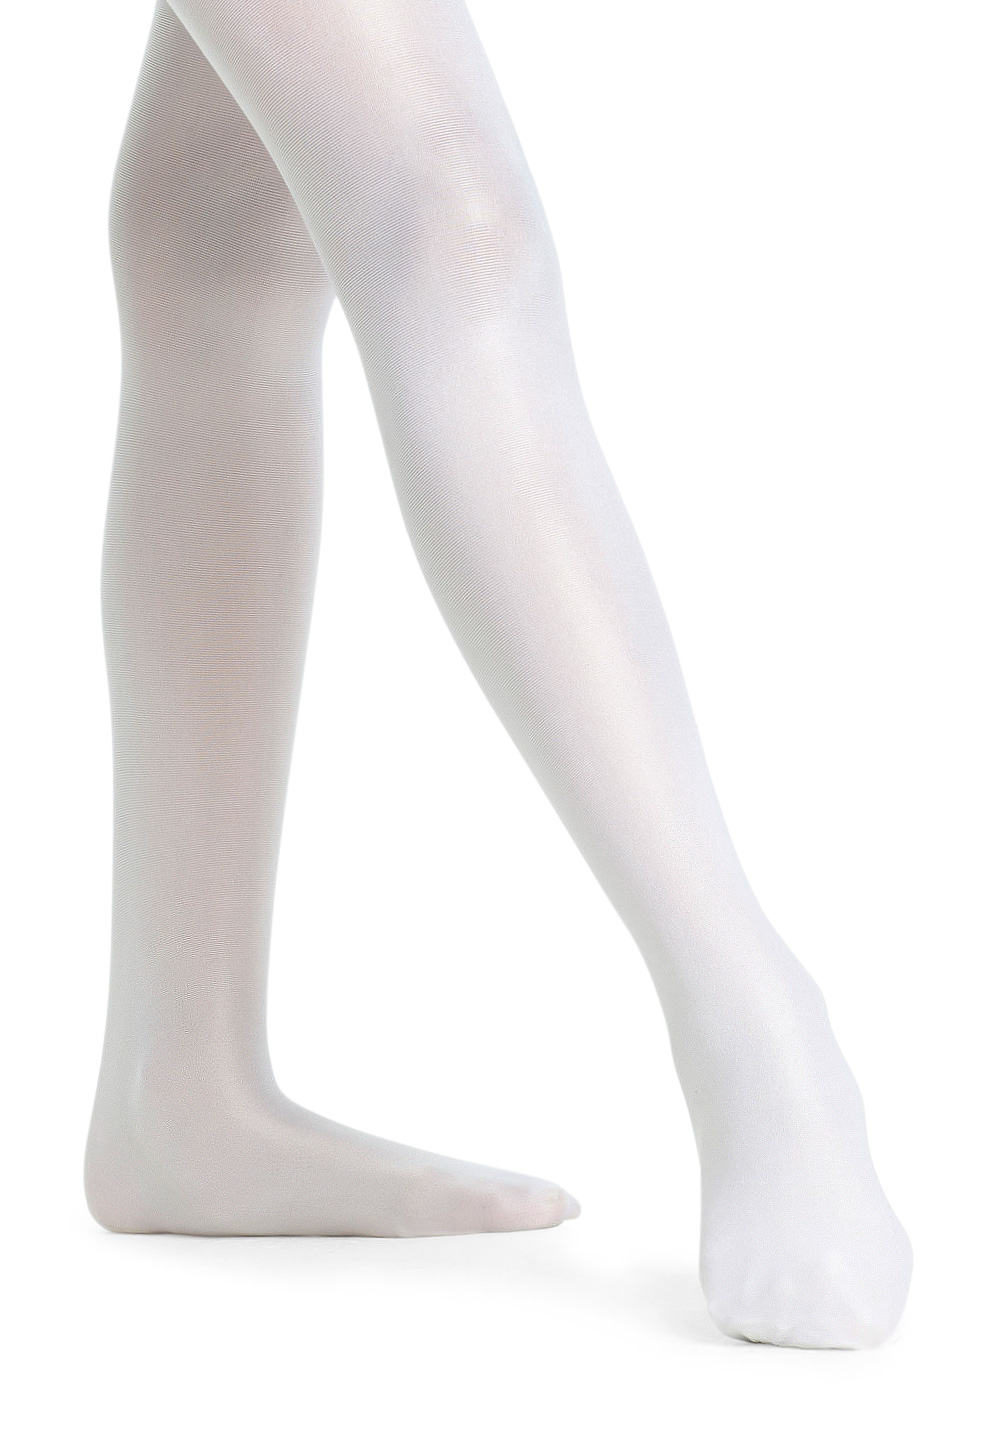 Child Girl's Ultra Shimmery Footed Dance Tights Kids Full Foot Shimmer Tights 